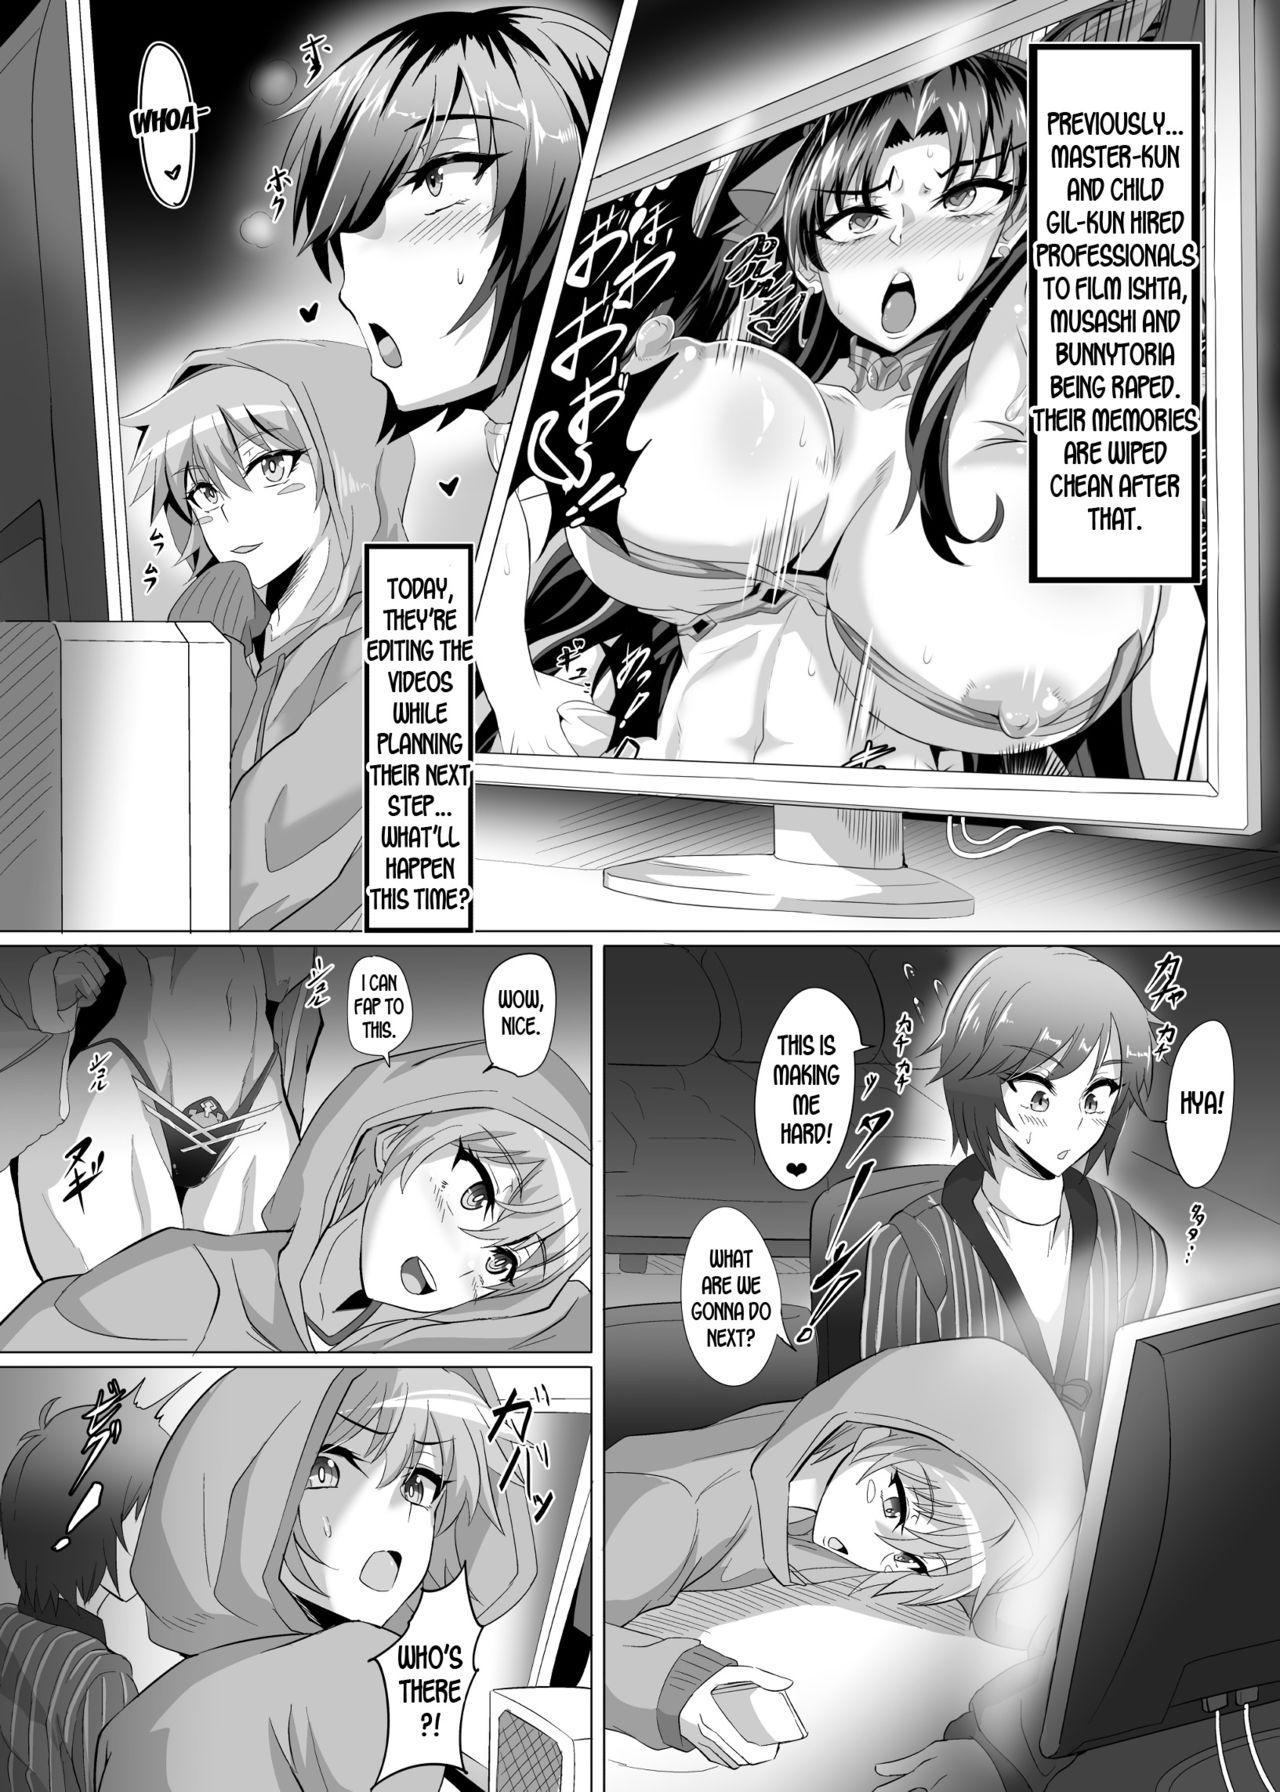 Free 18 Year Old Porn DOSUKEBE. FGO!! Vol. 04 - Fate grand order Calle - Page 2